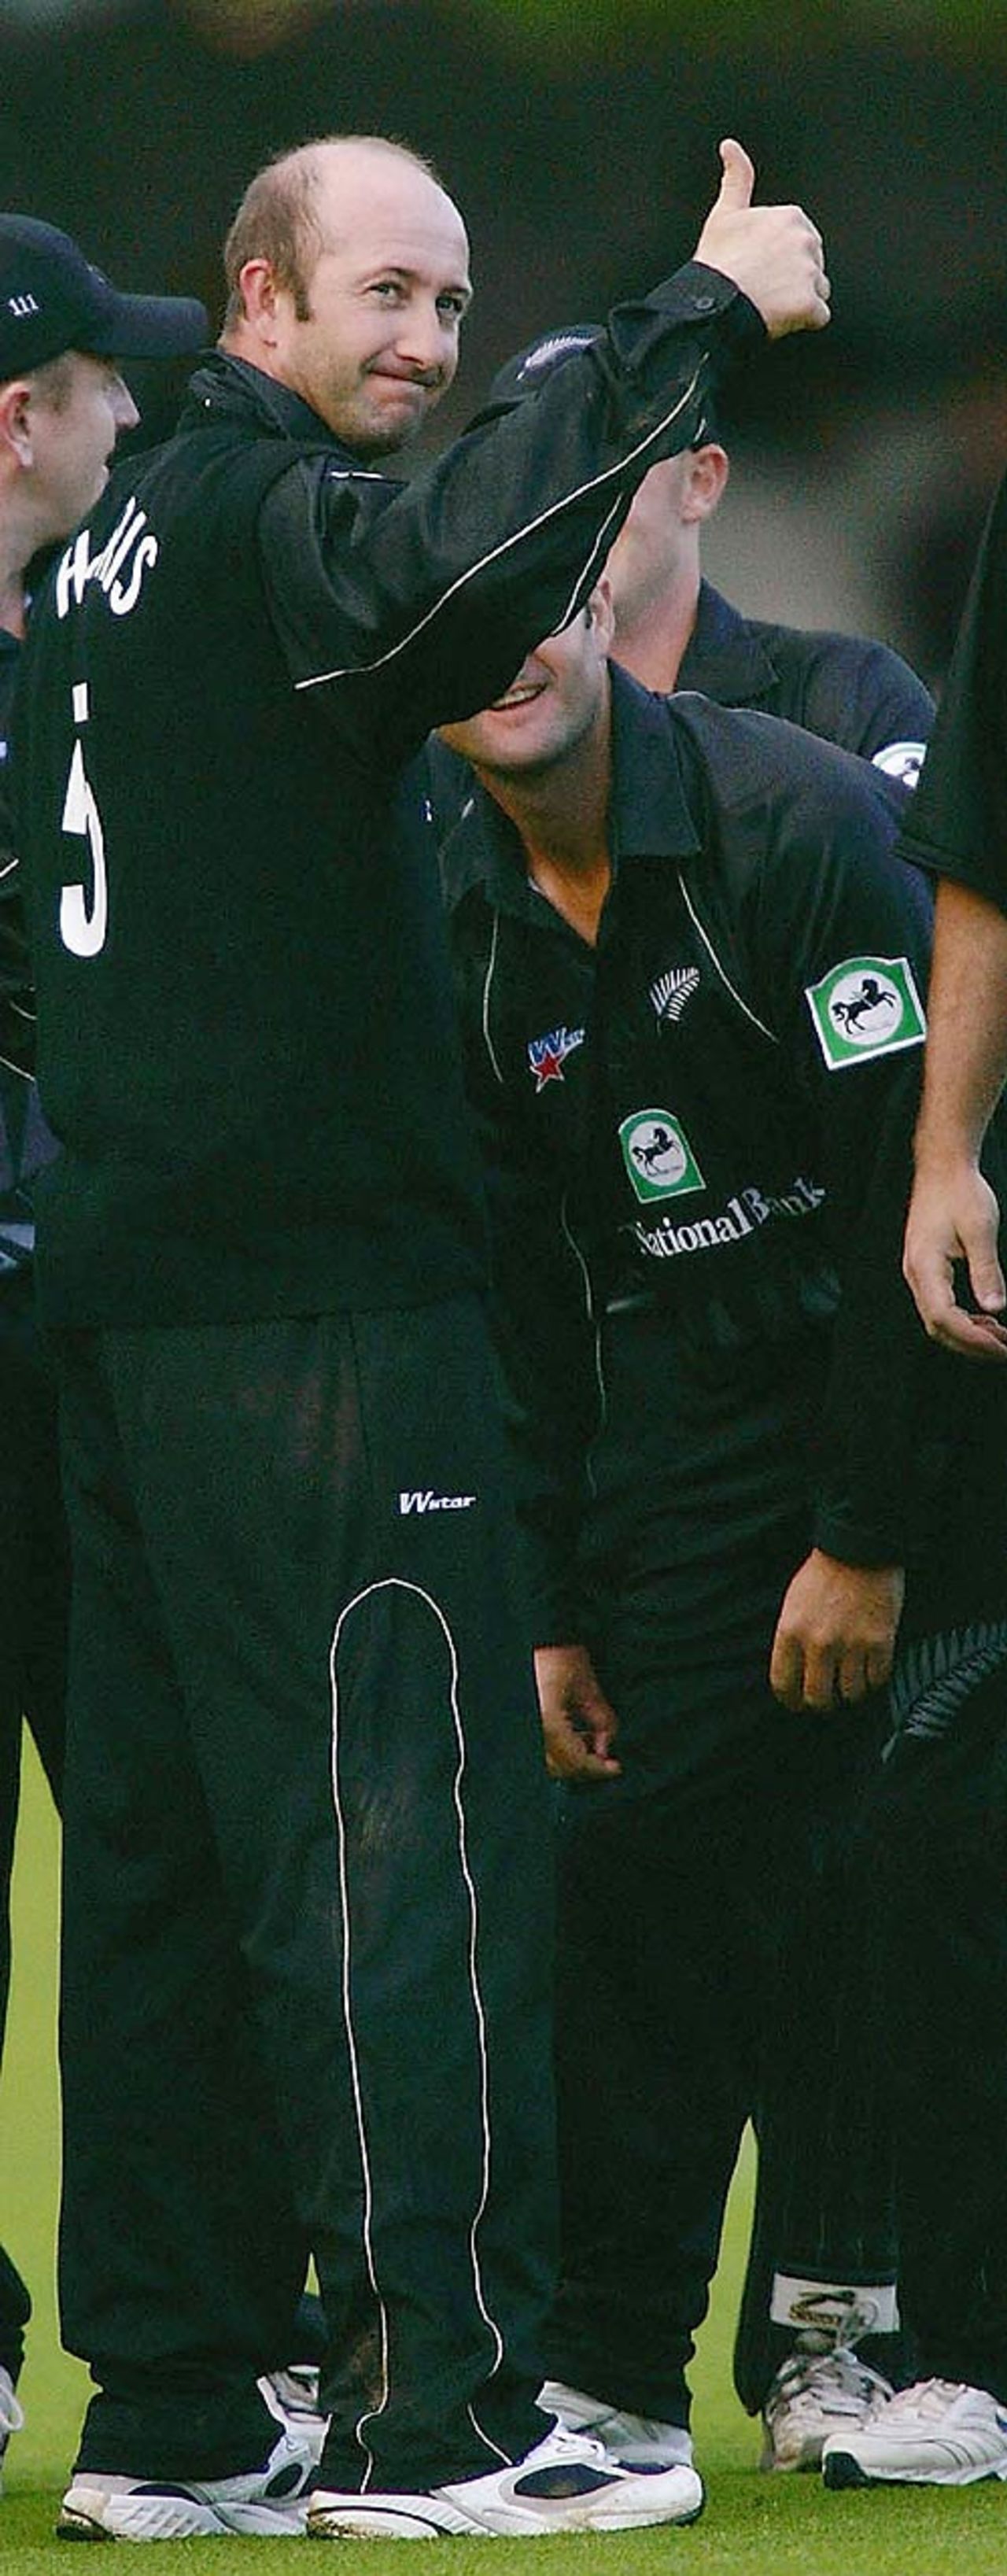 Chris Harris celebrates his 200th ODI wicket, New Zealand v West Indies, July 10, 2004, Lord's